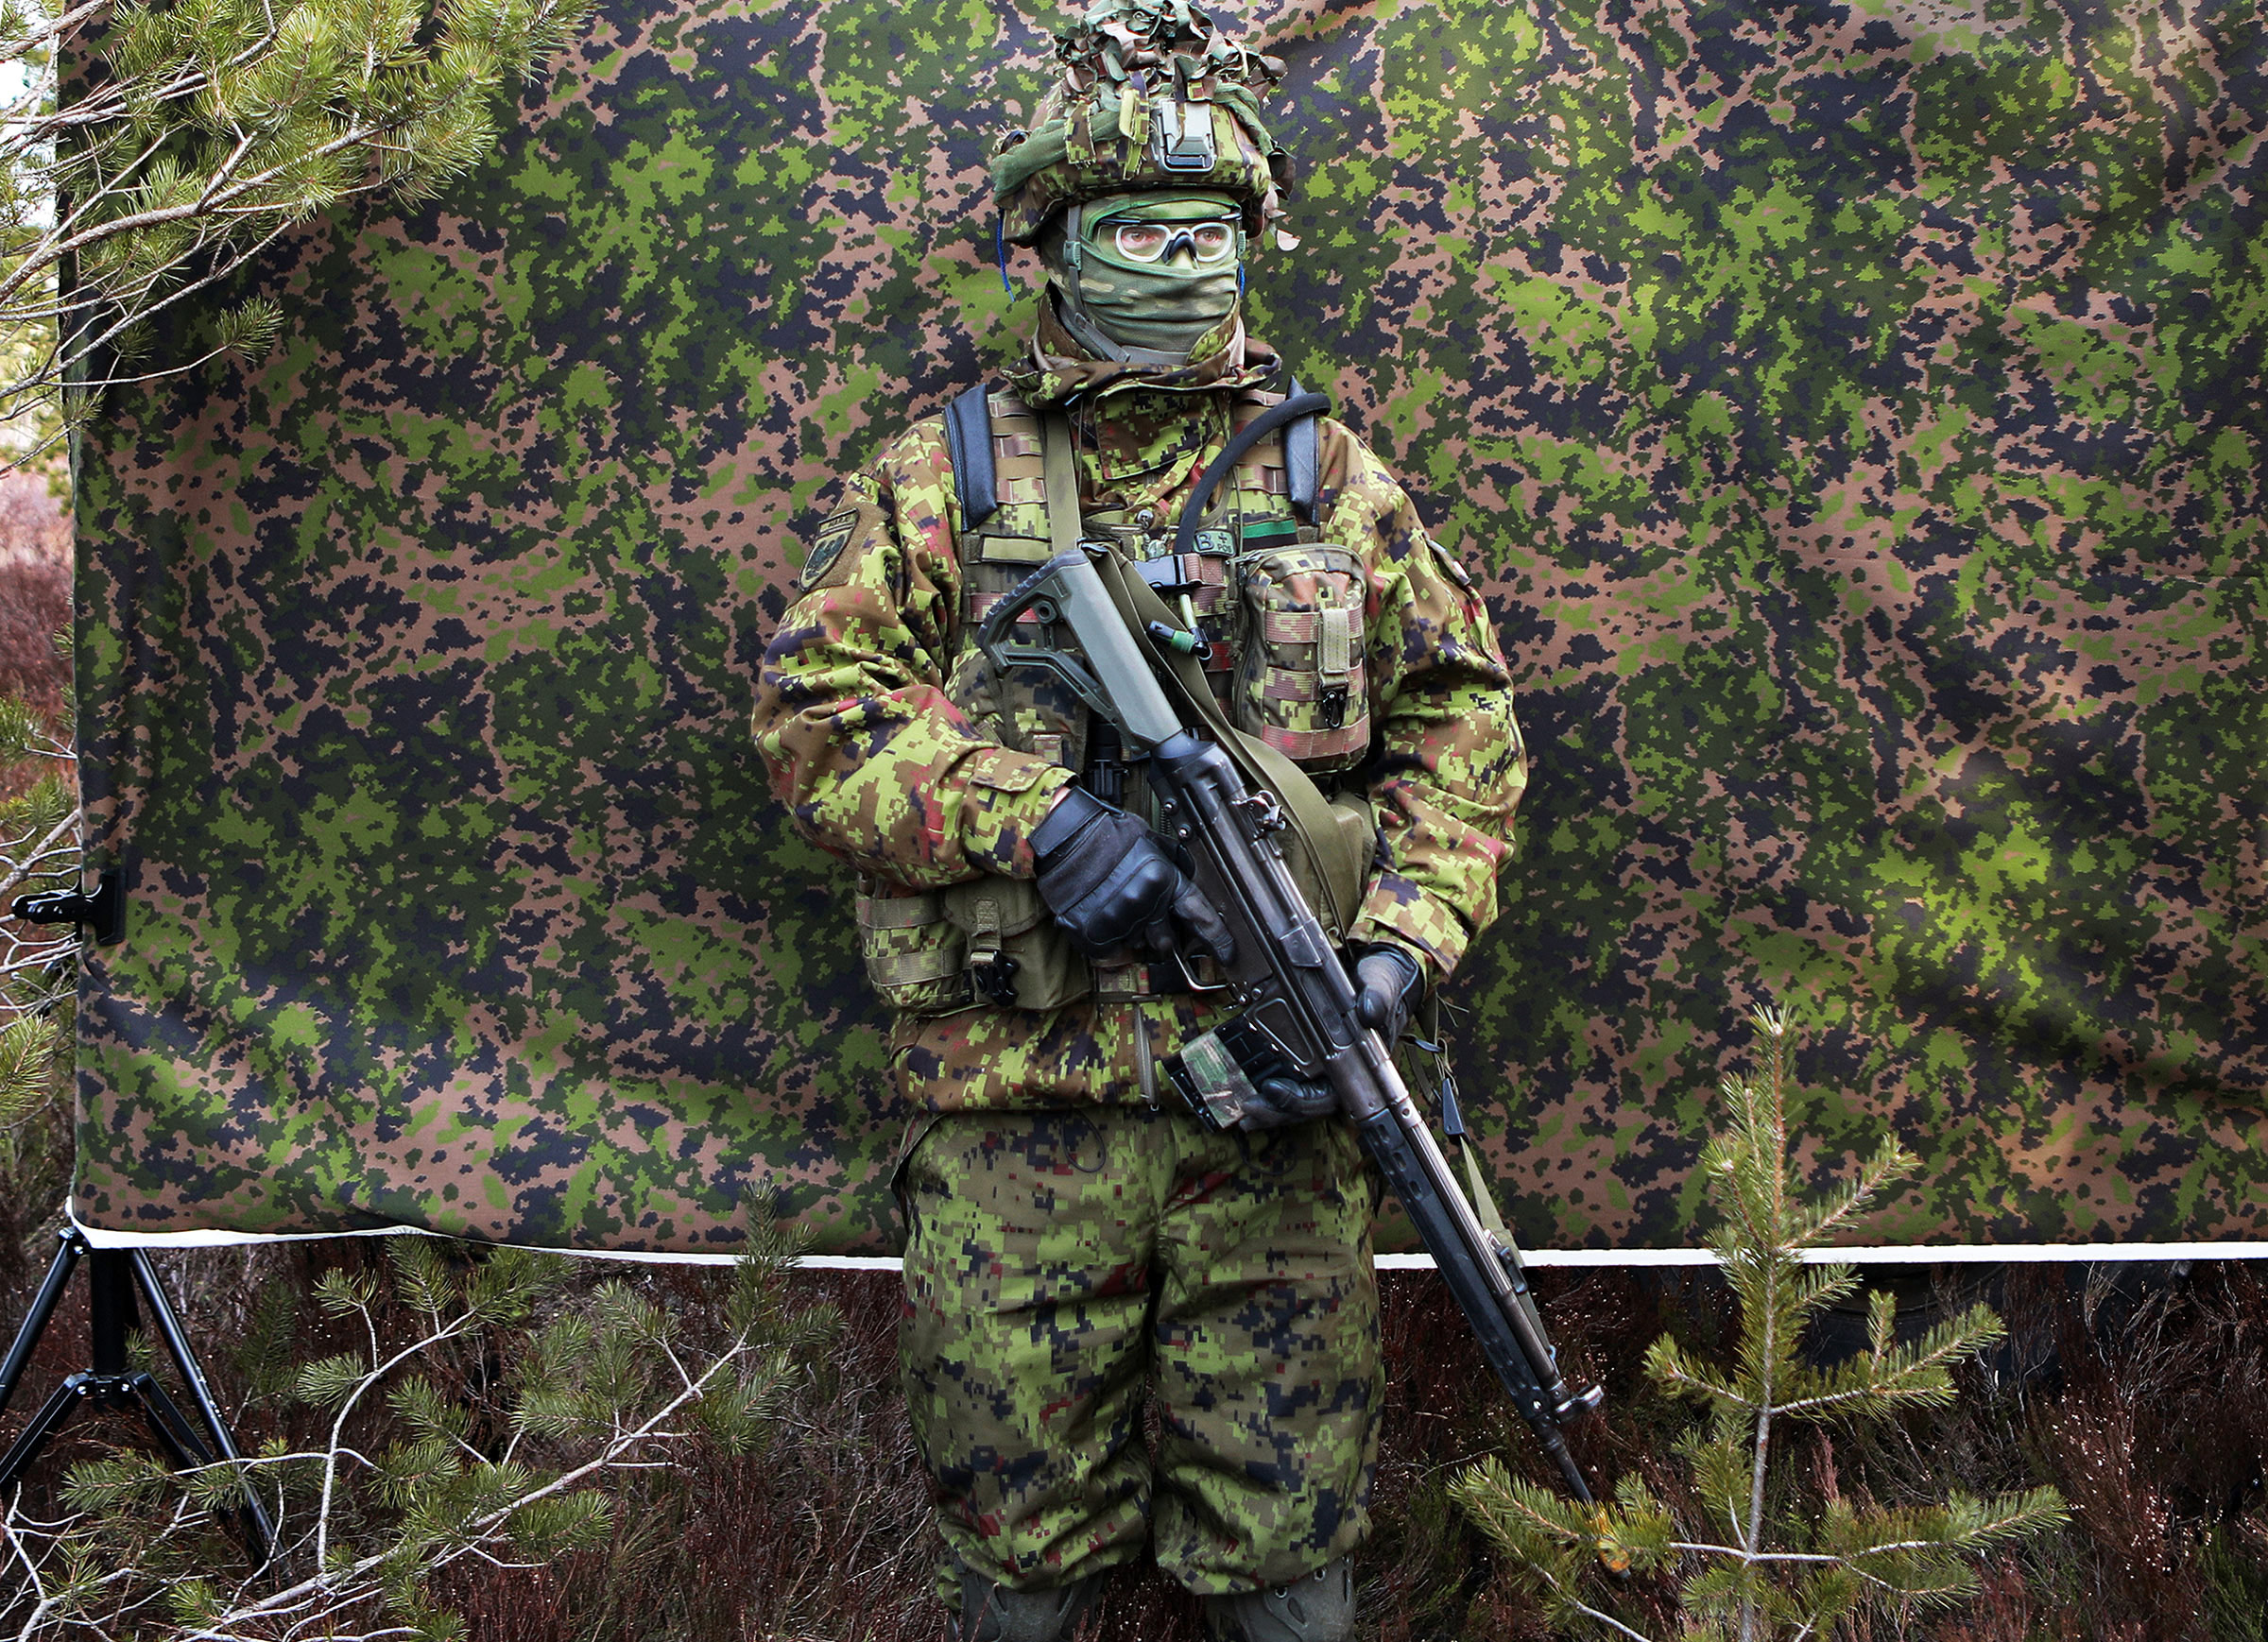 The Ordinary Civilians in Estonia Preparing to Protect Their Country Against Putin